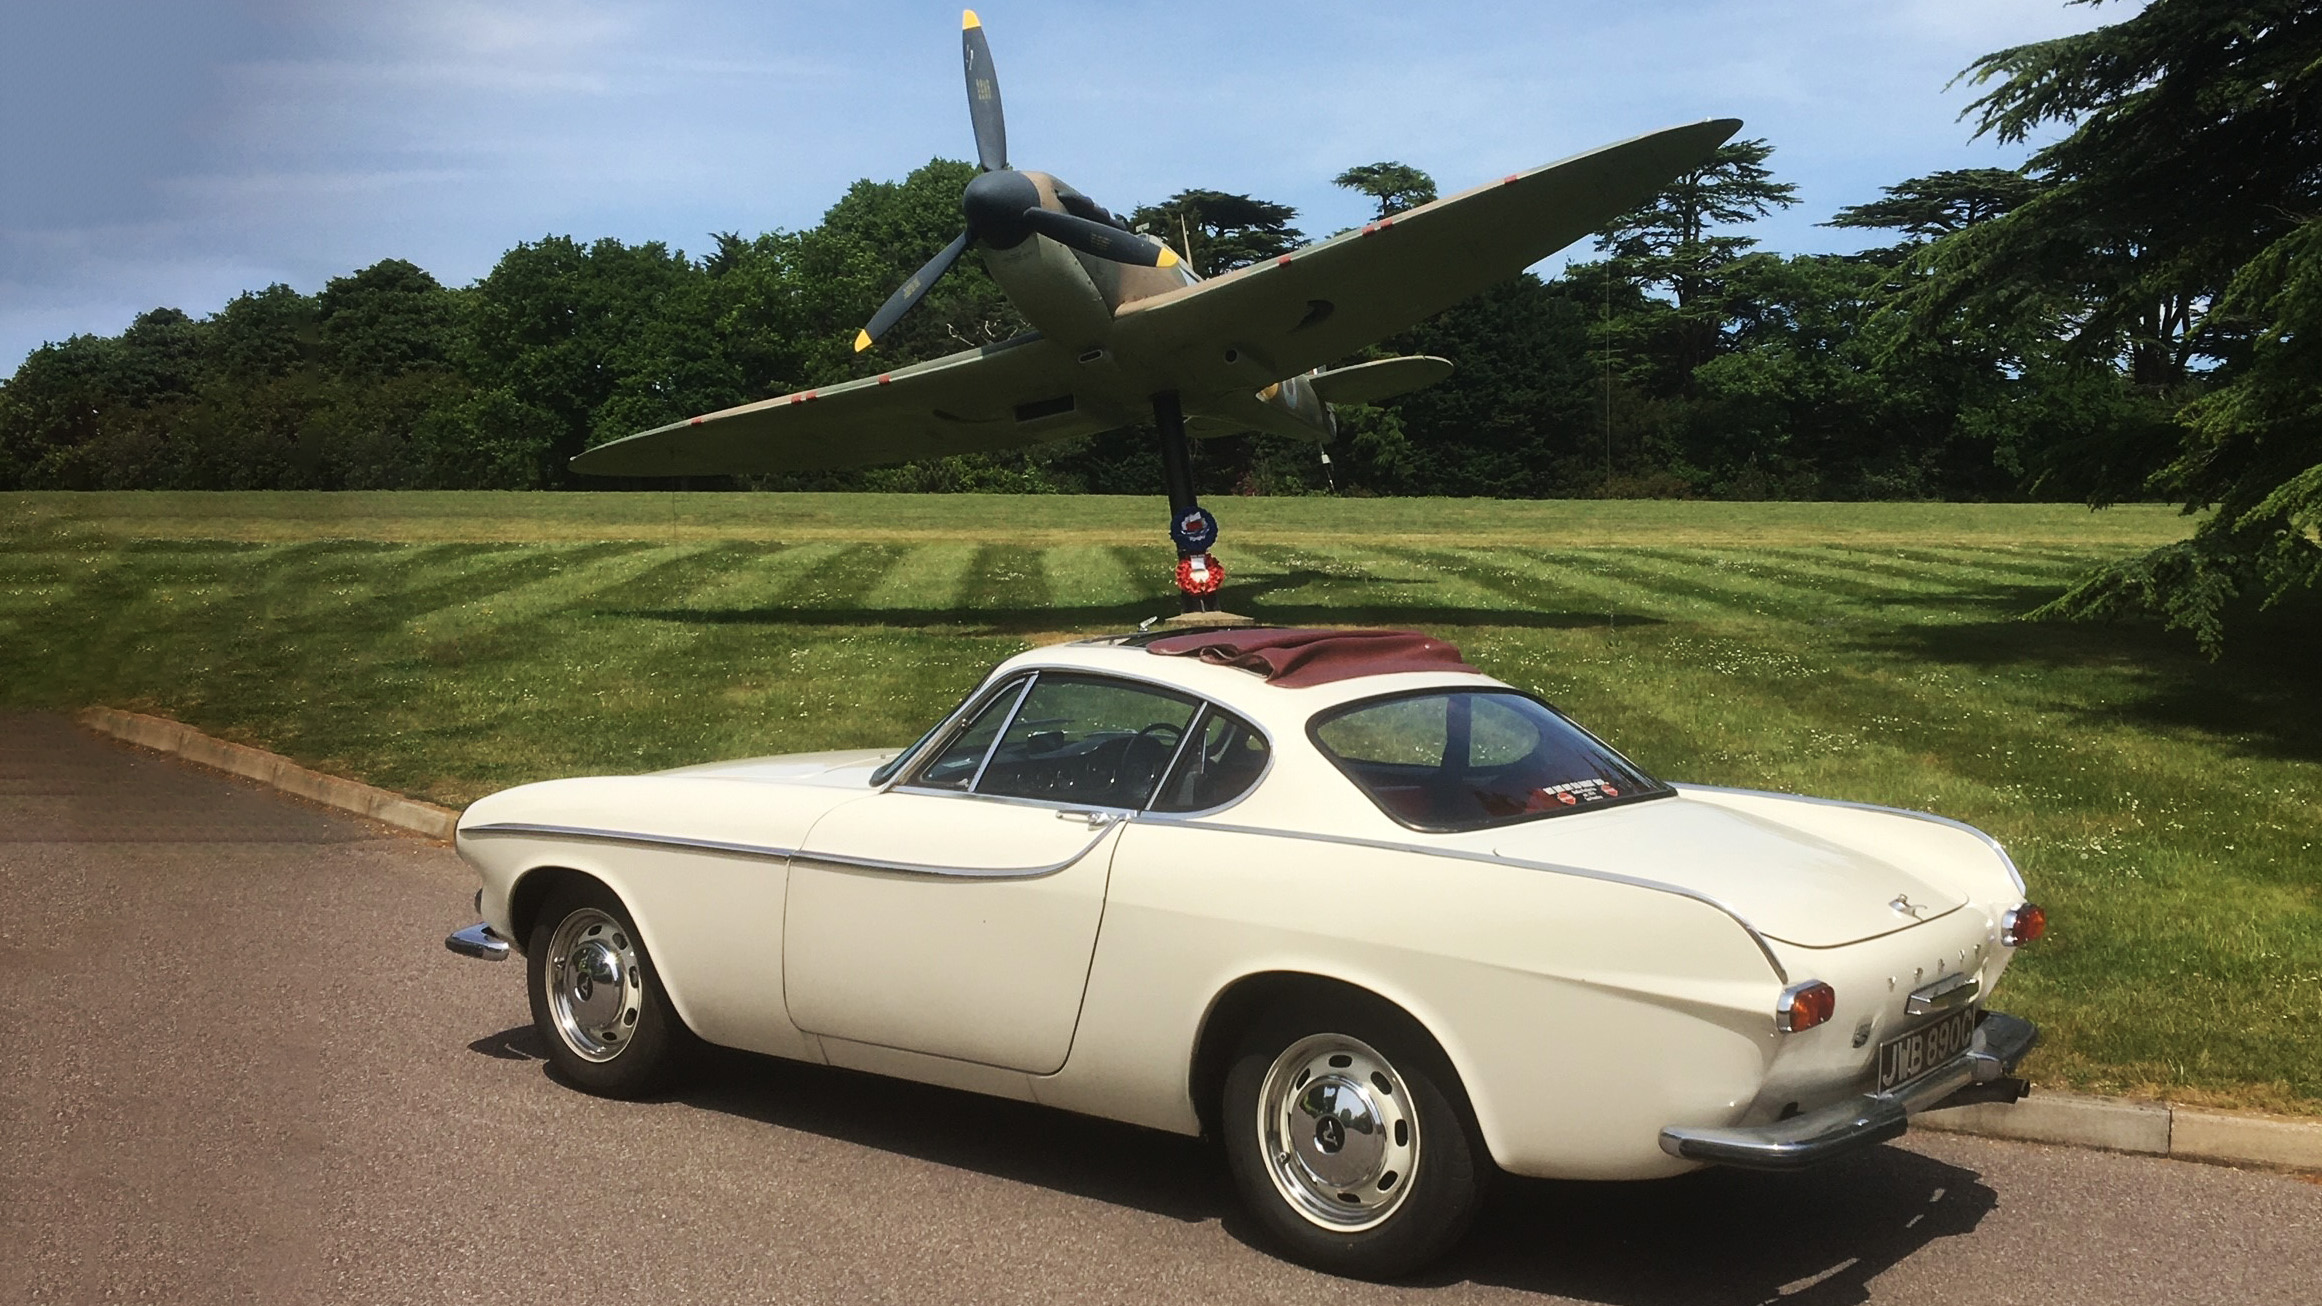 Rear side view of a Classic Volvo  P1800S in ivory with a burgundy webasto roof. Vehicle is parked in front of a military plane on display